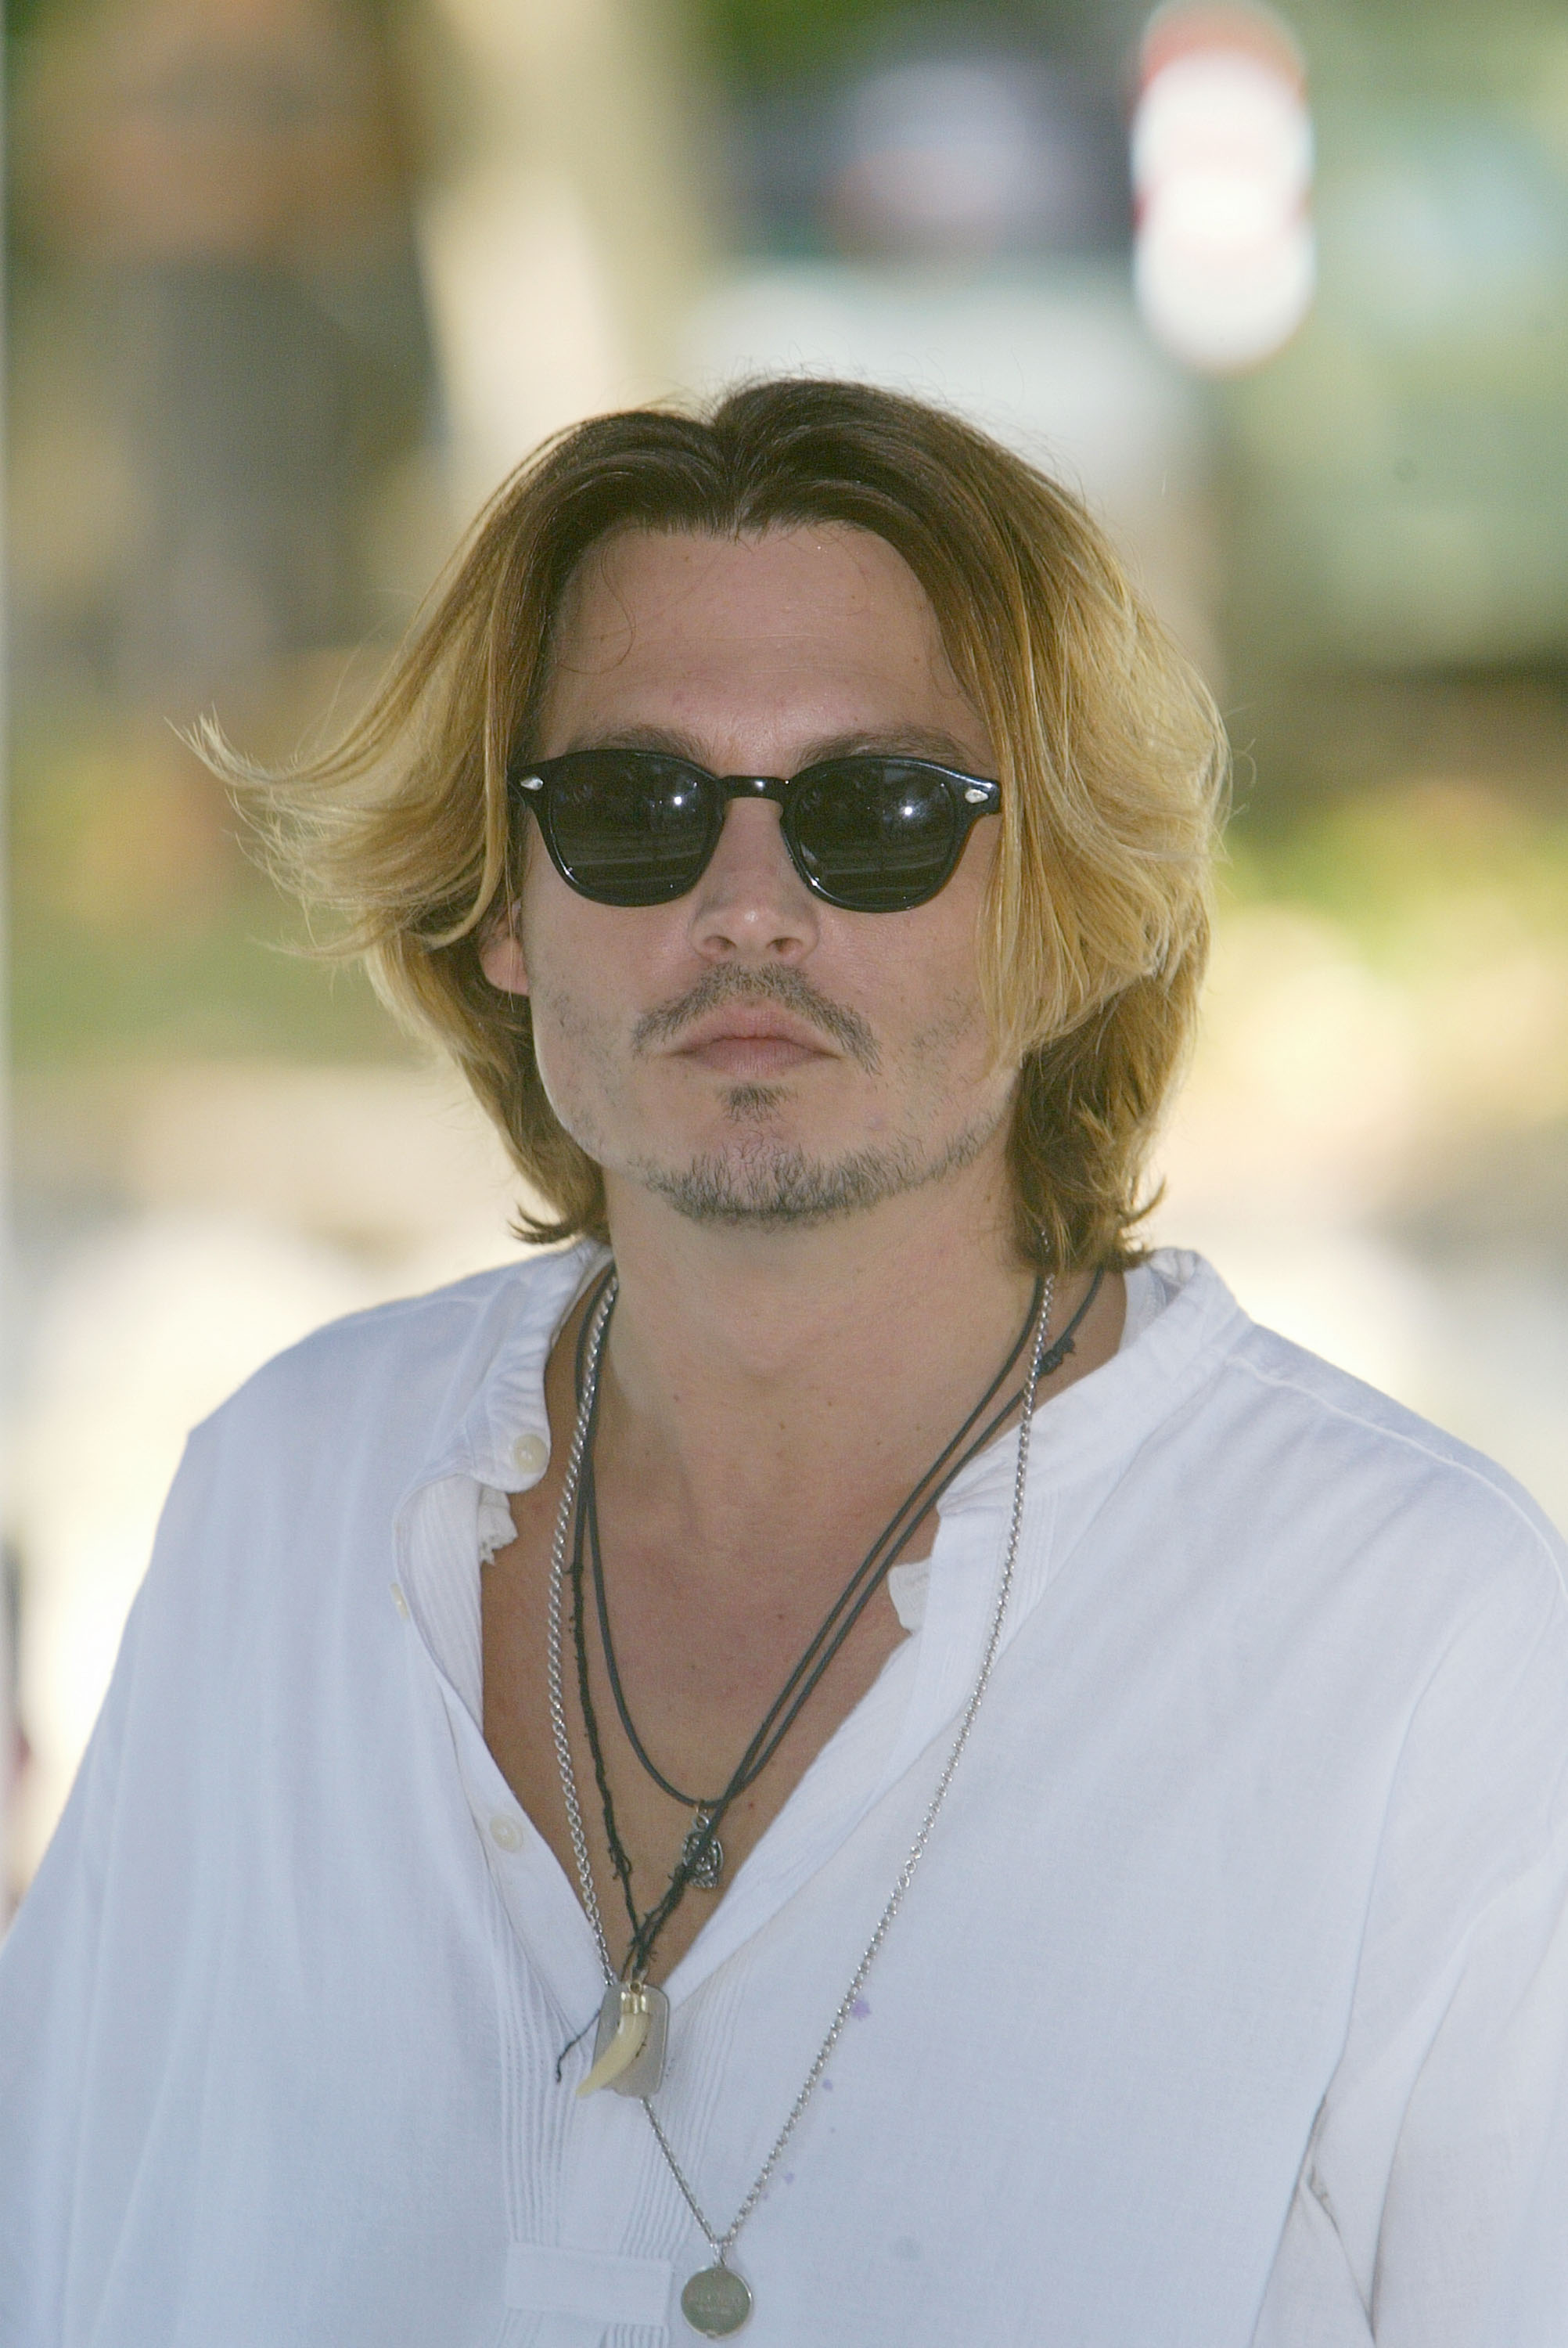 Johnny Depp arriving for the 60th Venice Film Festival in Venice, Italy on August 28, 2003 | Source: Getty Images